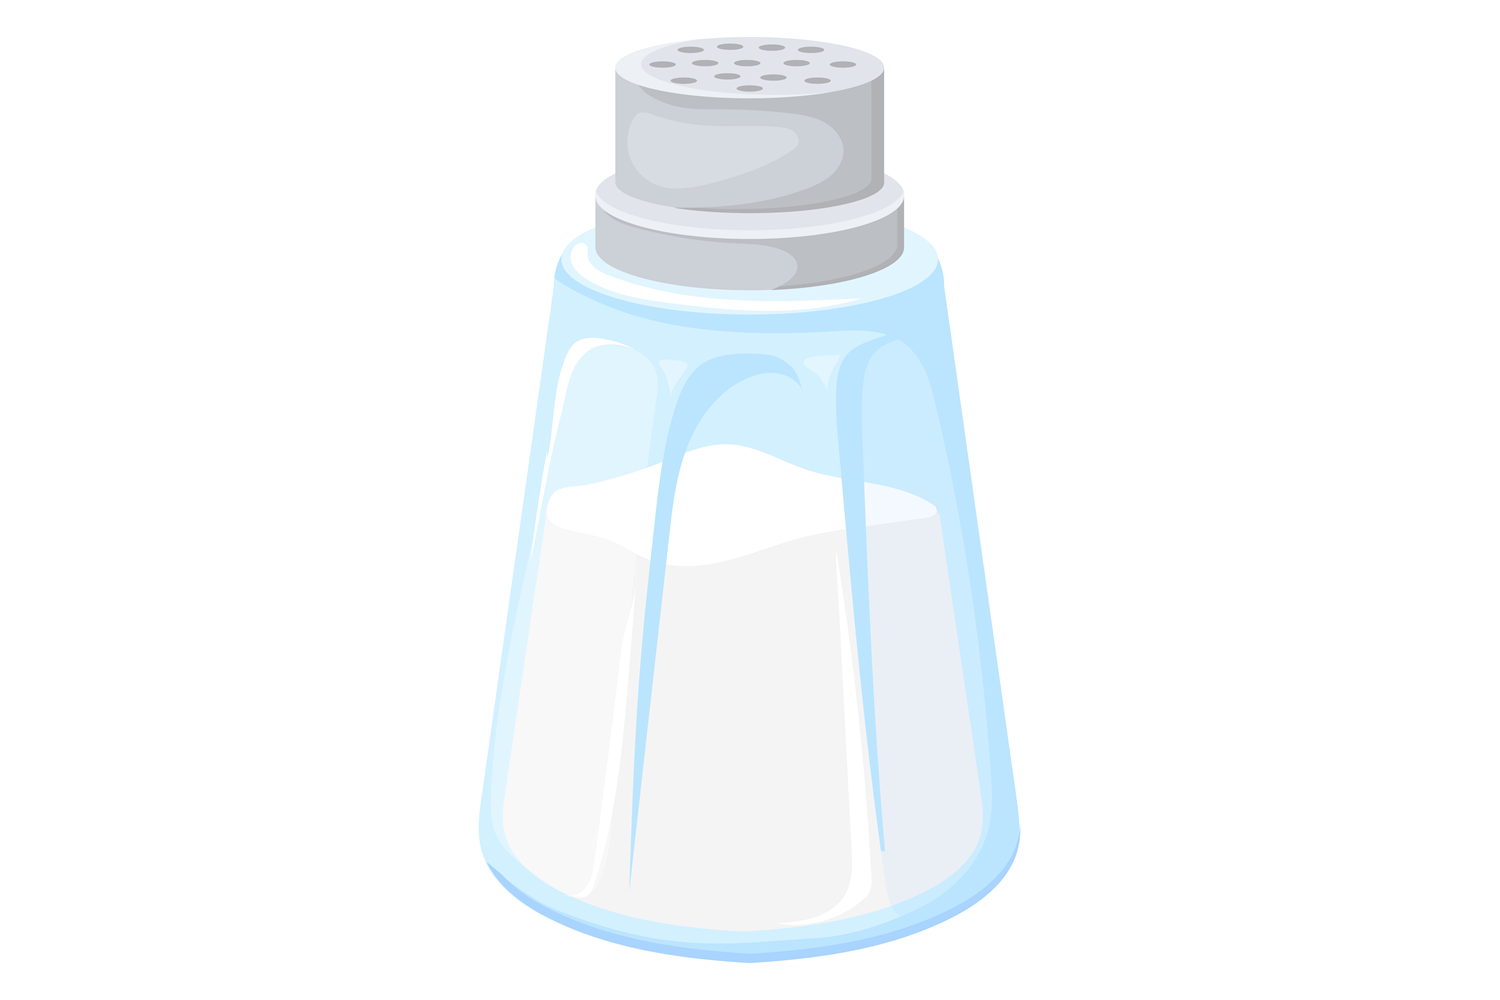 Glass Salt Shaker. Cartoon Cooking Spice Graphic by